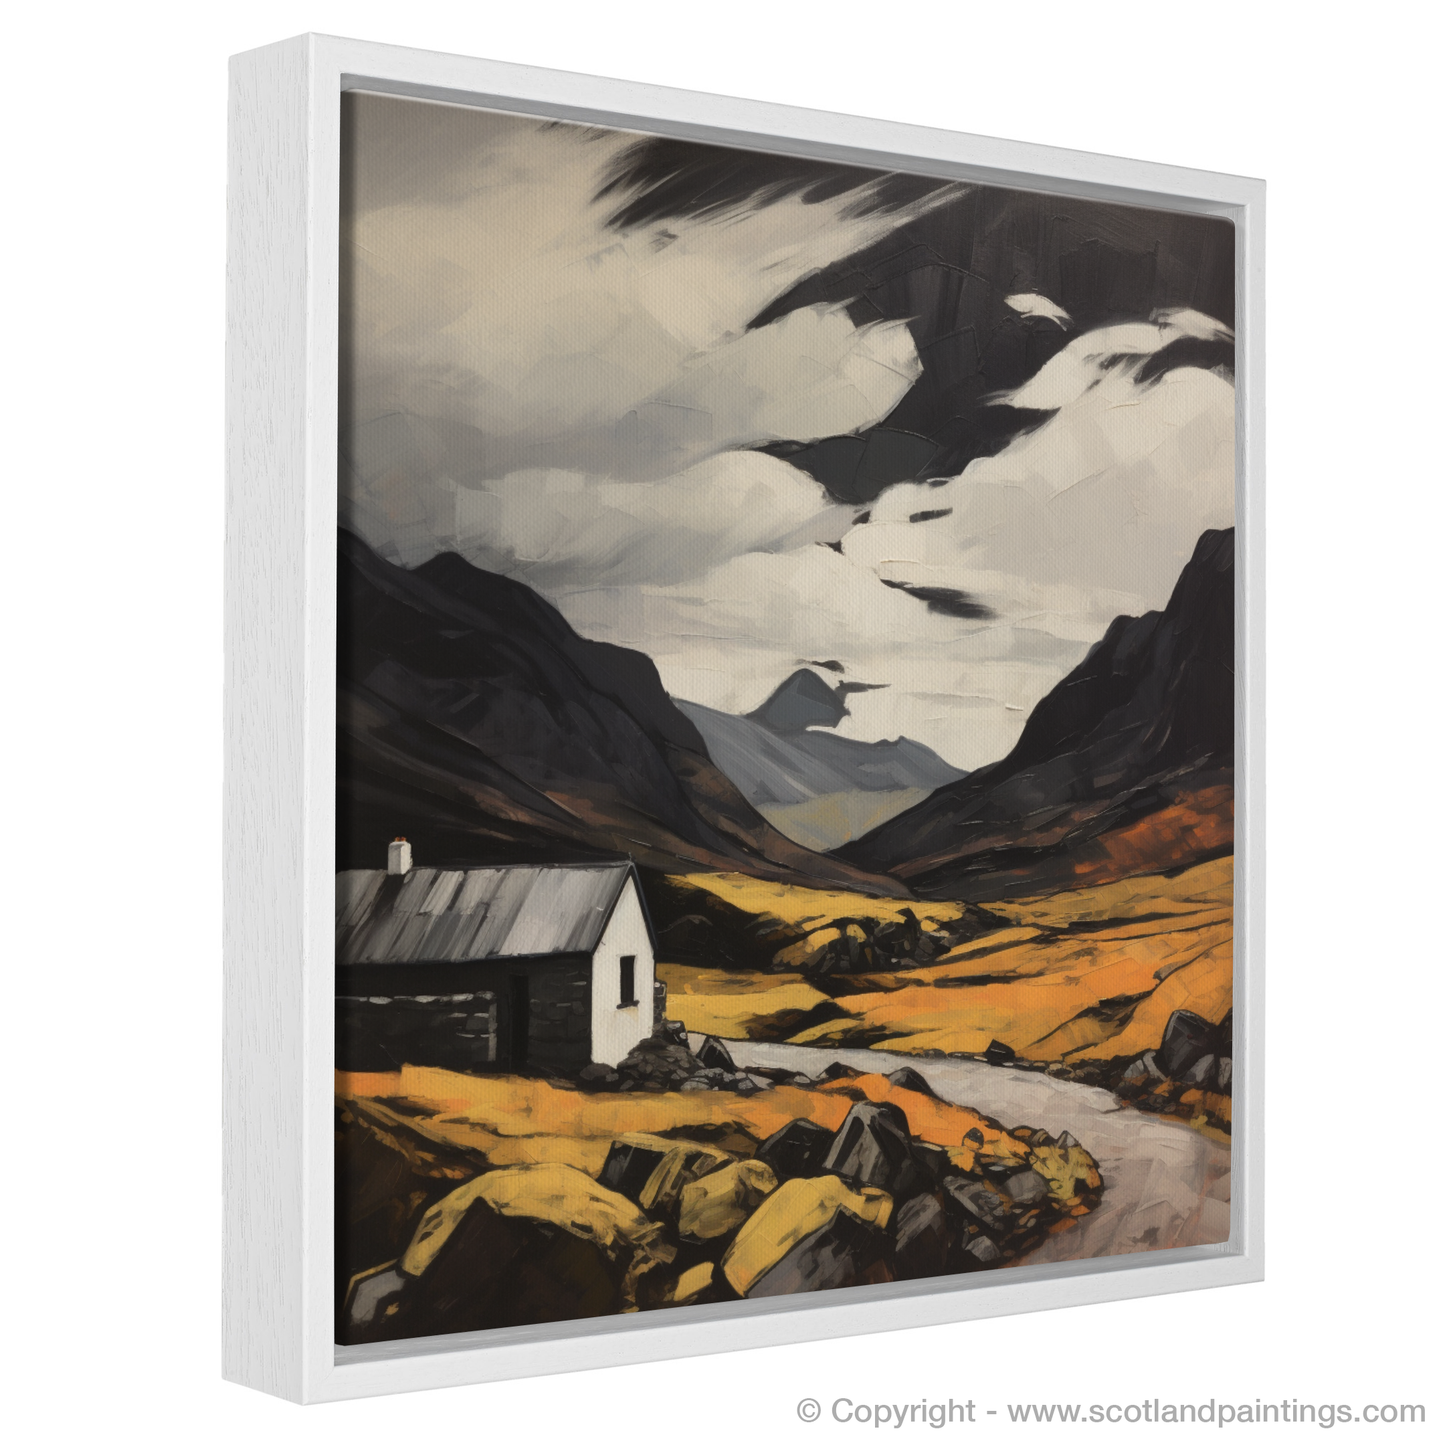 Painting and Art Print of Creag Leacach entitled "Majesty of Creag Leacach: An Expressionist Homage to Scottish Munros".